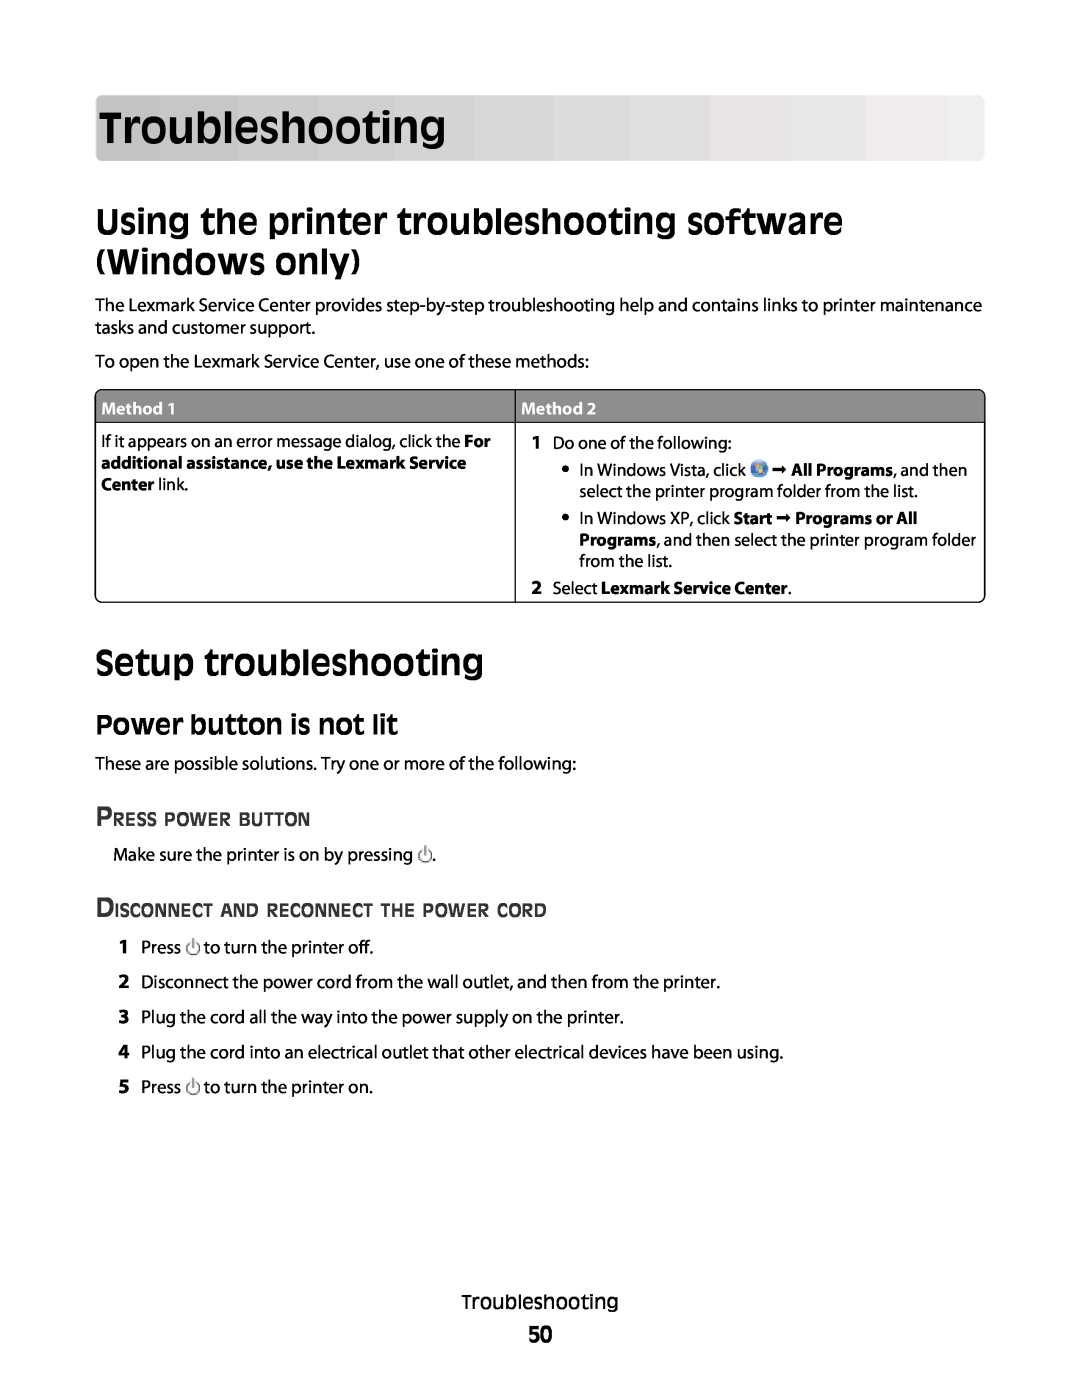 Lexmark 4433, 4445 manual Troubleshooting, Using the printer troubleshooting software Windows only, Setup troubleshooting 